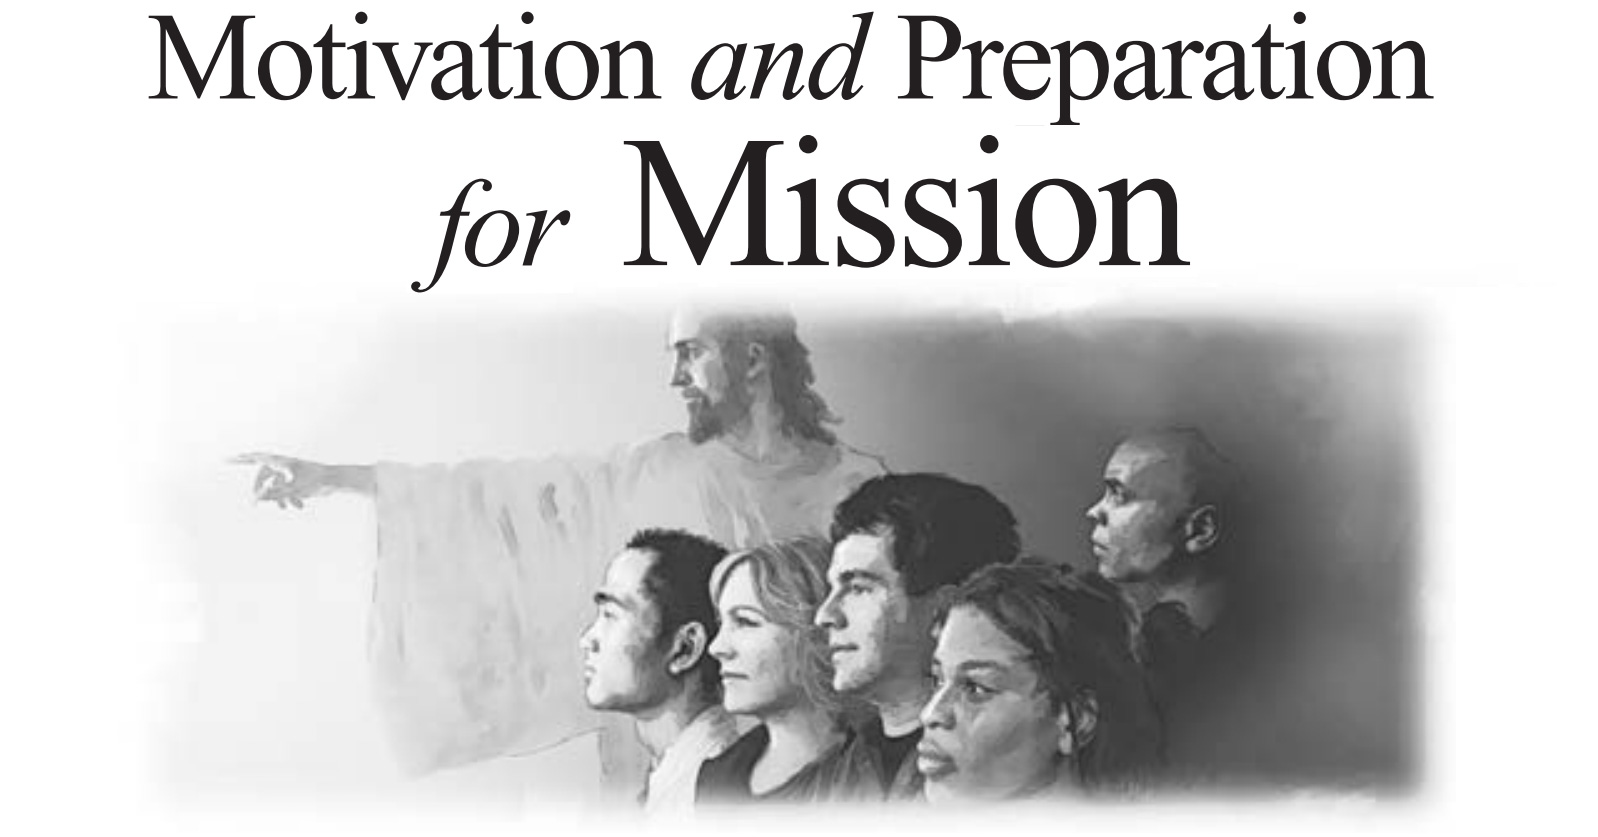 Motivation and Preparation for Mission